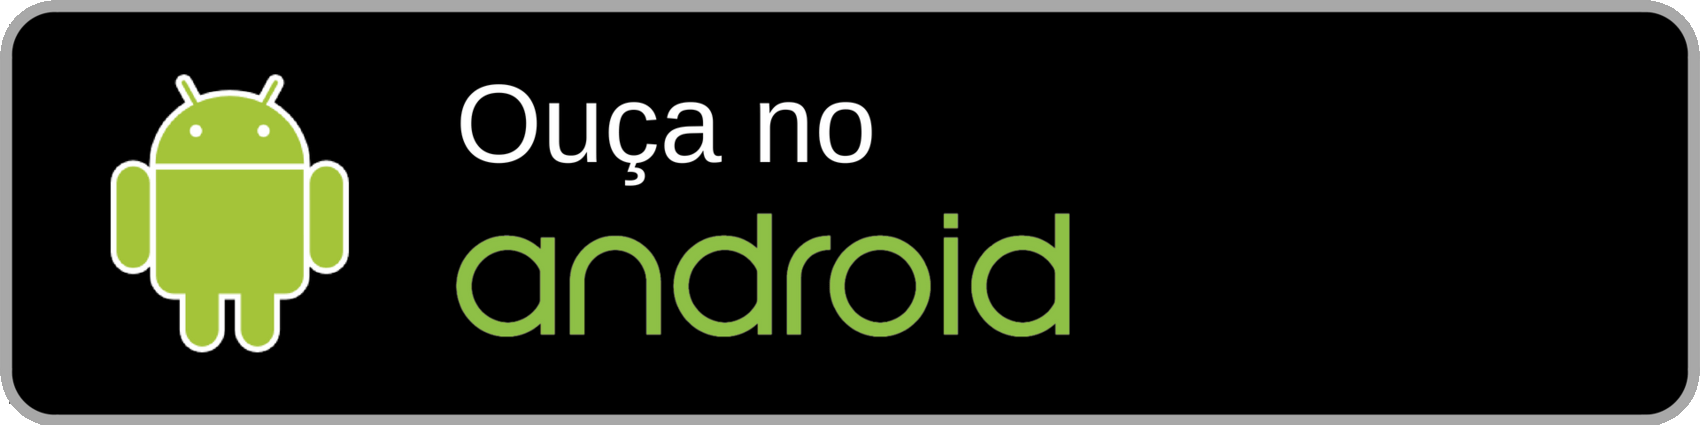 Assine Octanage Podcast no Android